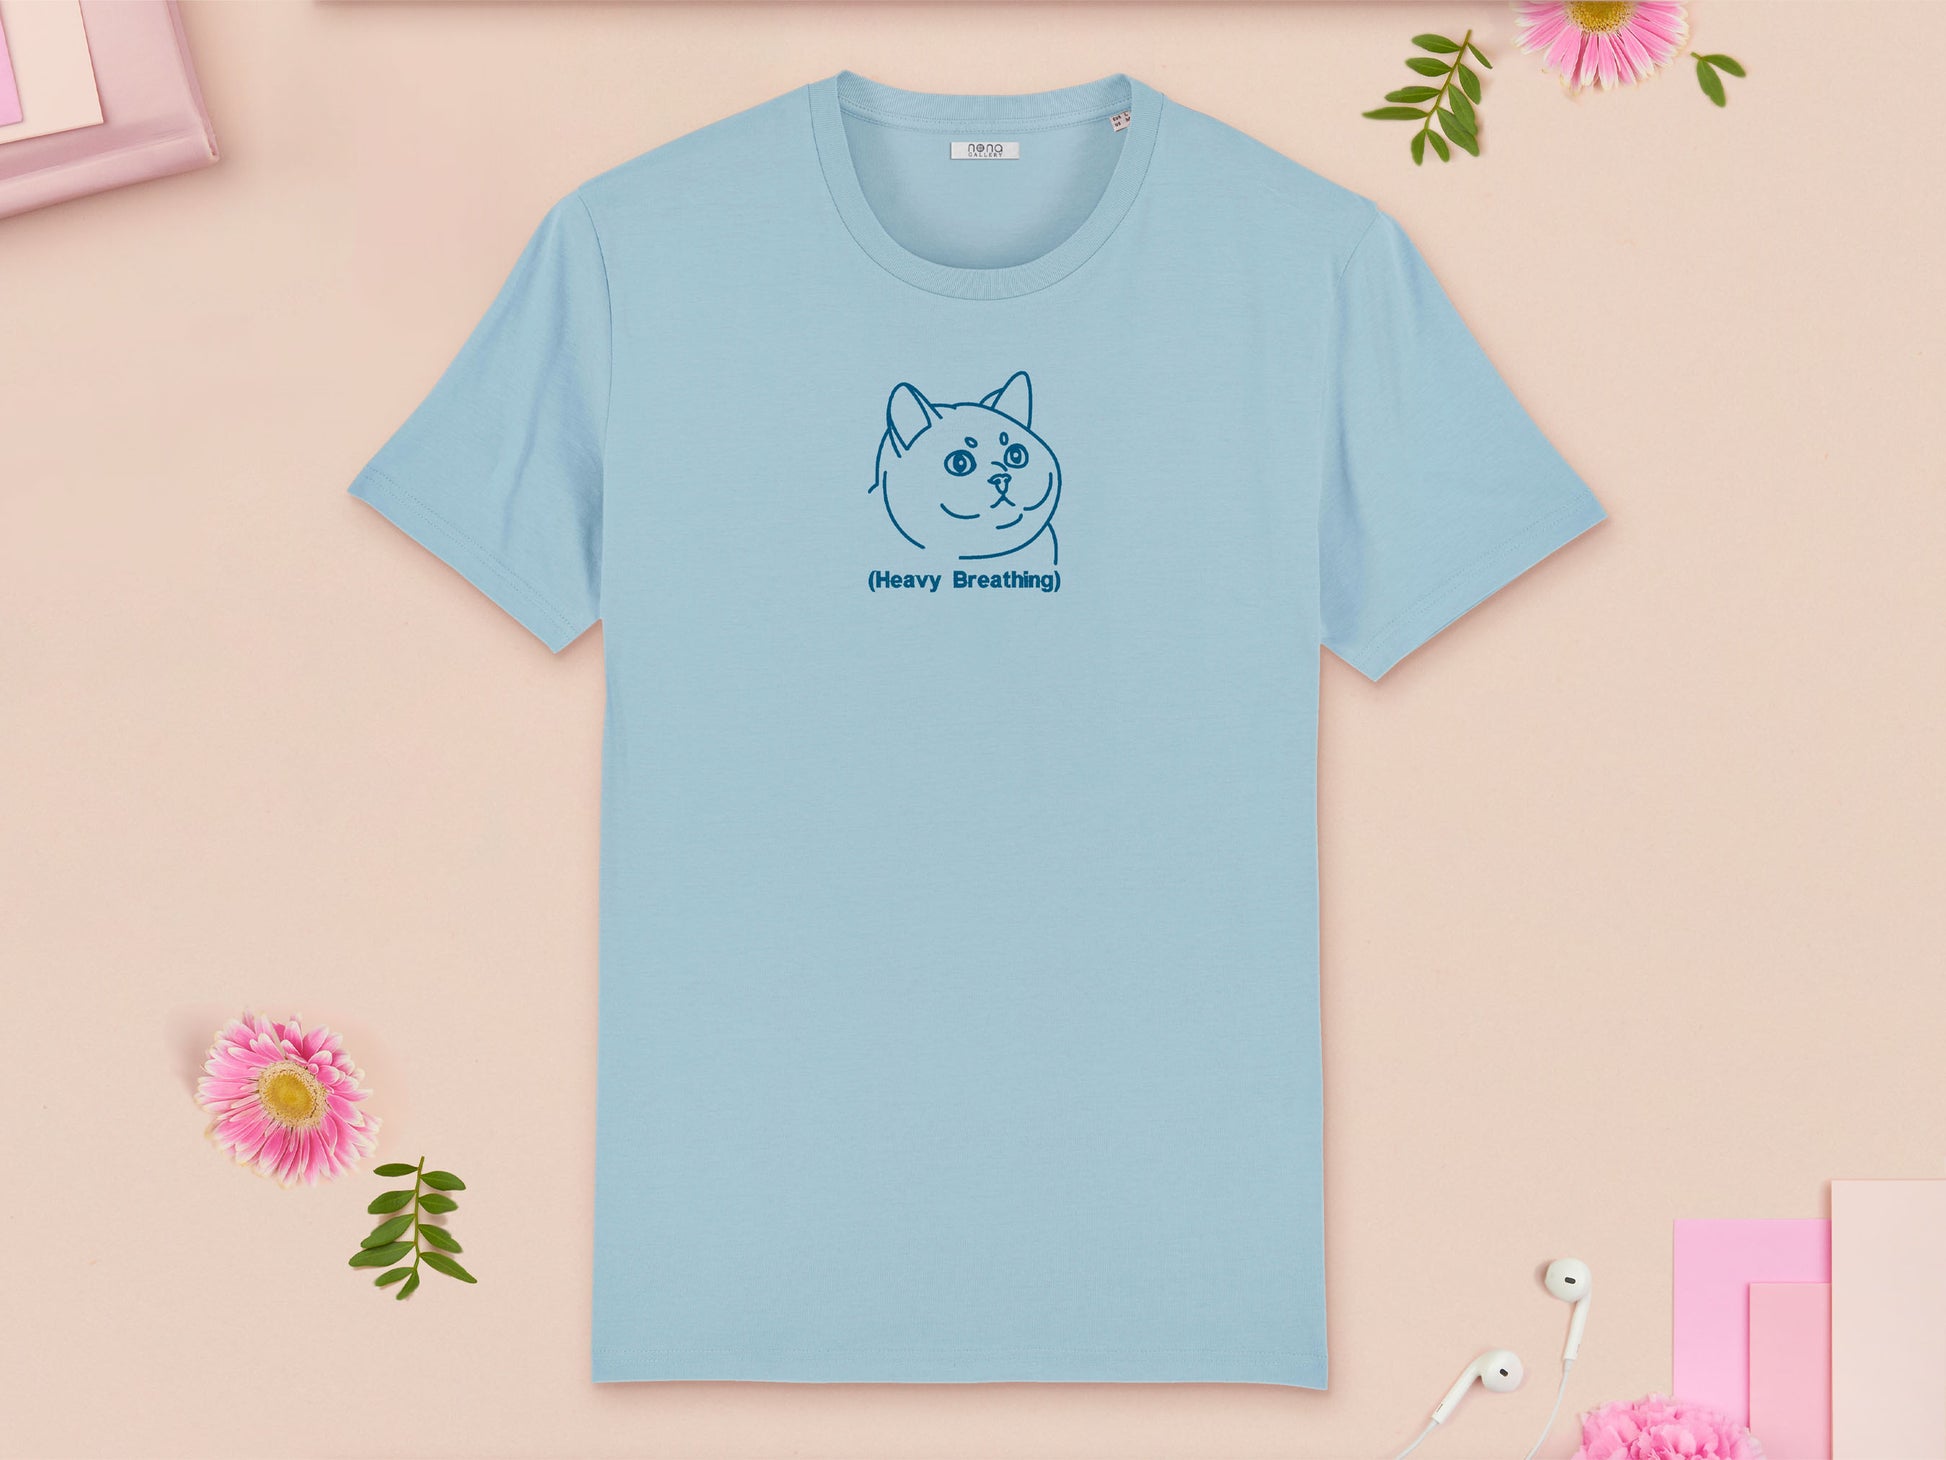 A blue crew neck short sleeve t-shirt, with an embroidered blue thread design of cute fat cat portrait with text underneath saying (Heavy Breathing)